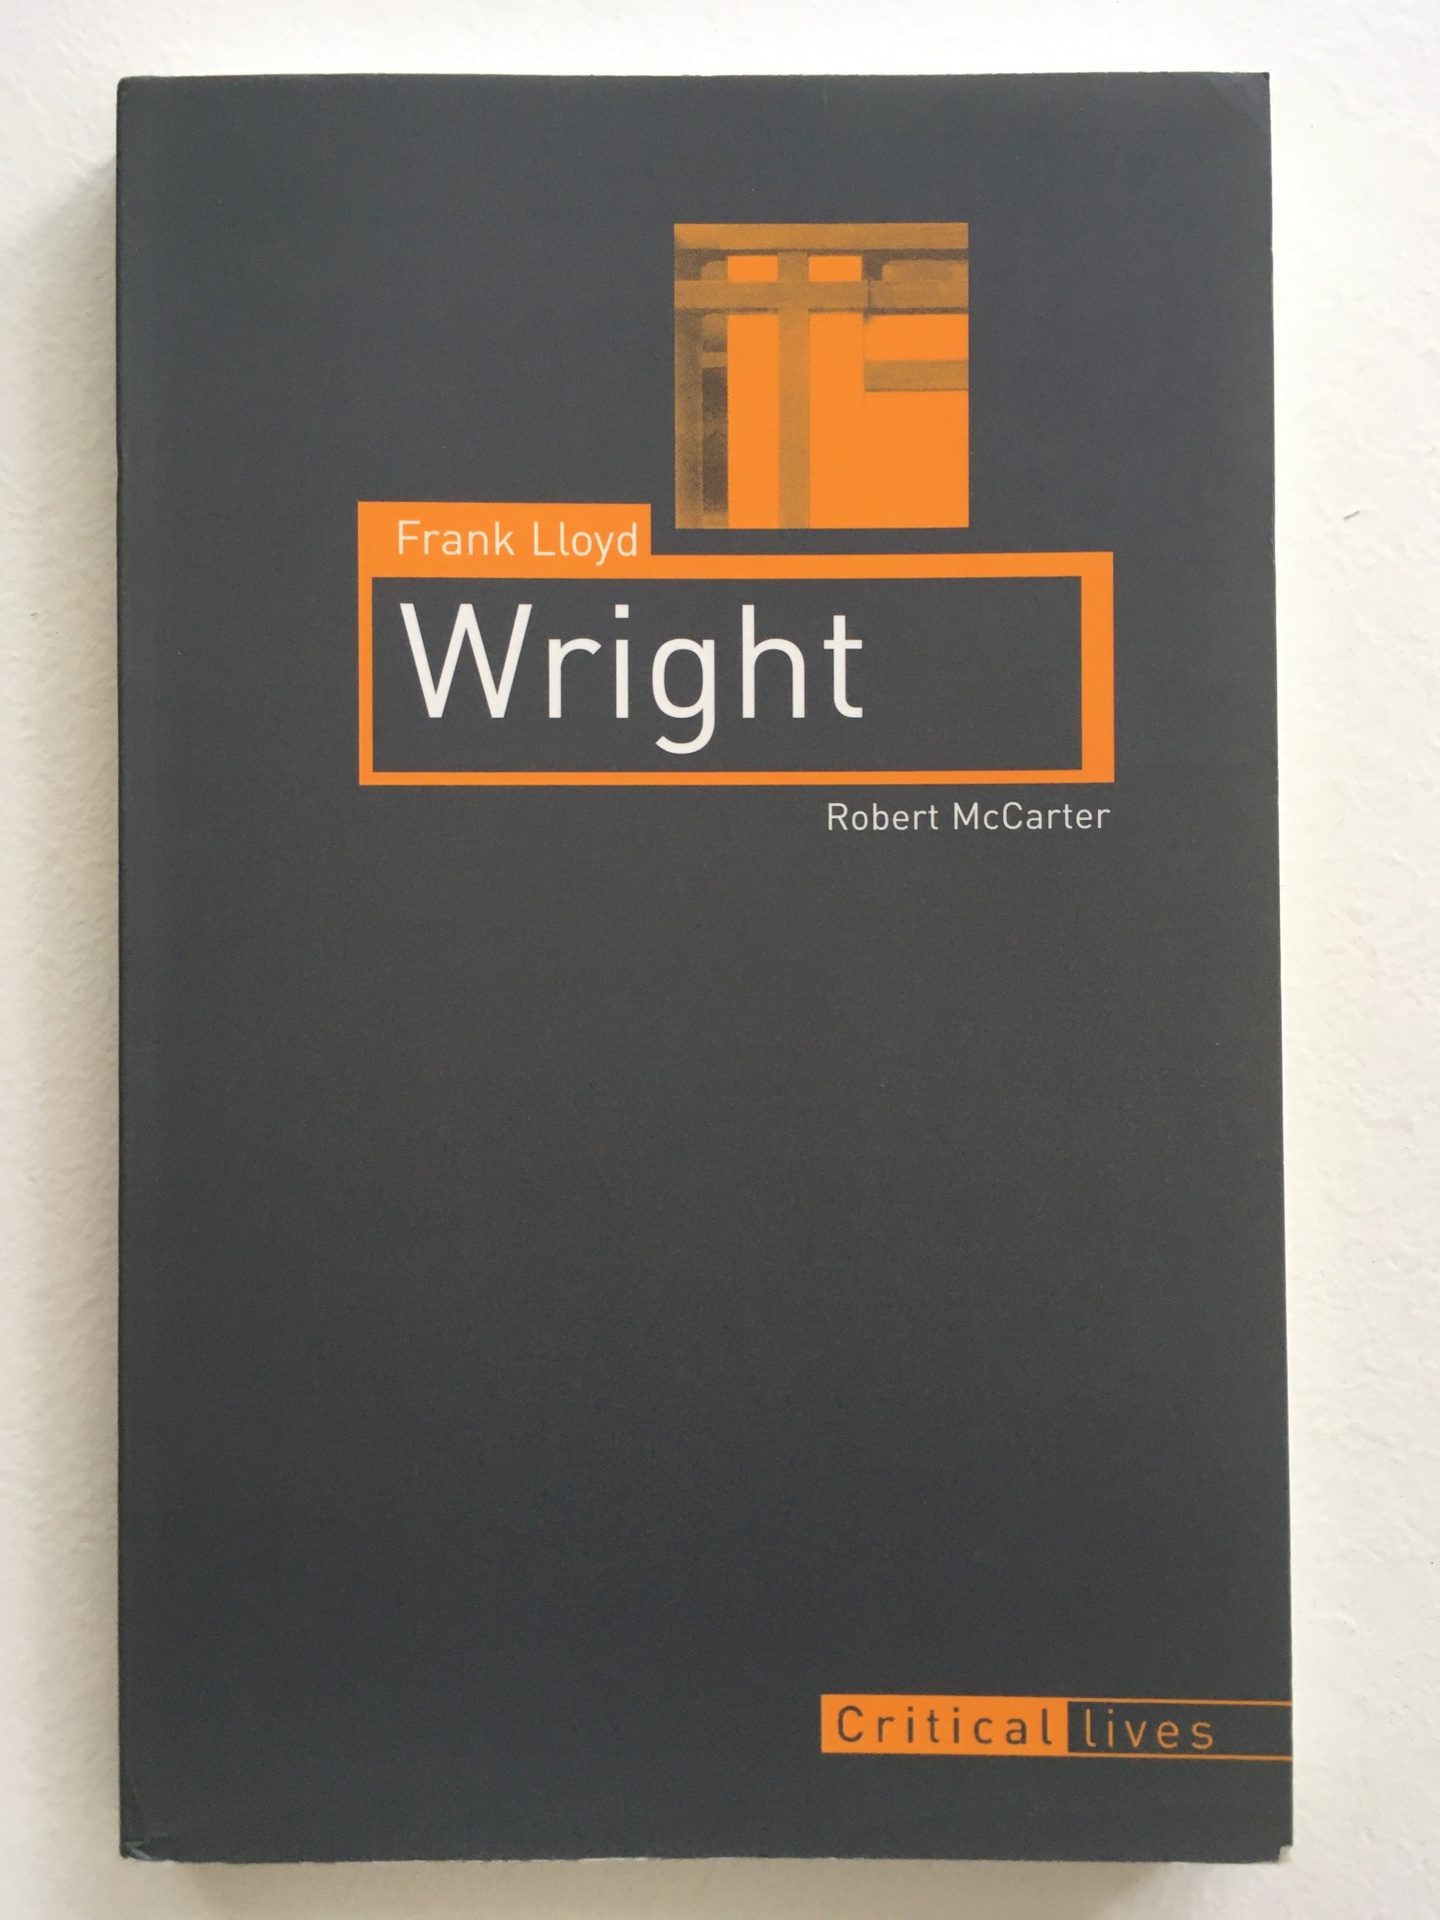 Cover of Frank Lloyd Wright, with a charcoal gray cover and orange detailing